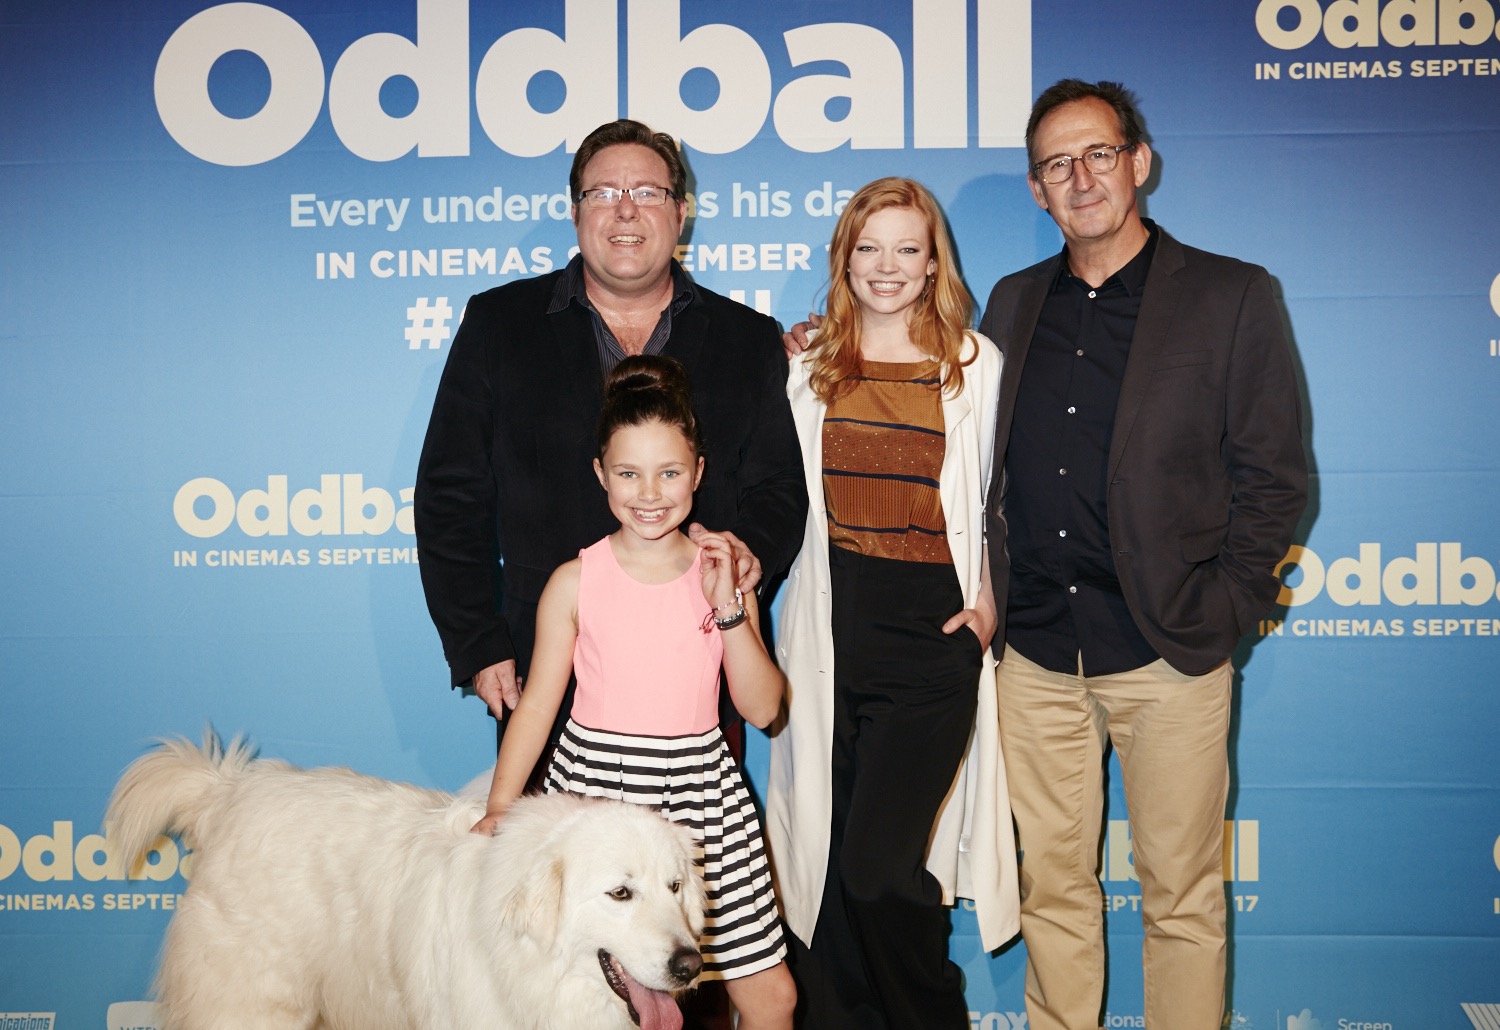 Shane Jacobson, Coco Jack Gillies, Sarah Snook and Richard Keddie at the Sydney preview of Oddball (2015)